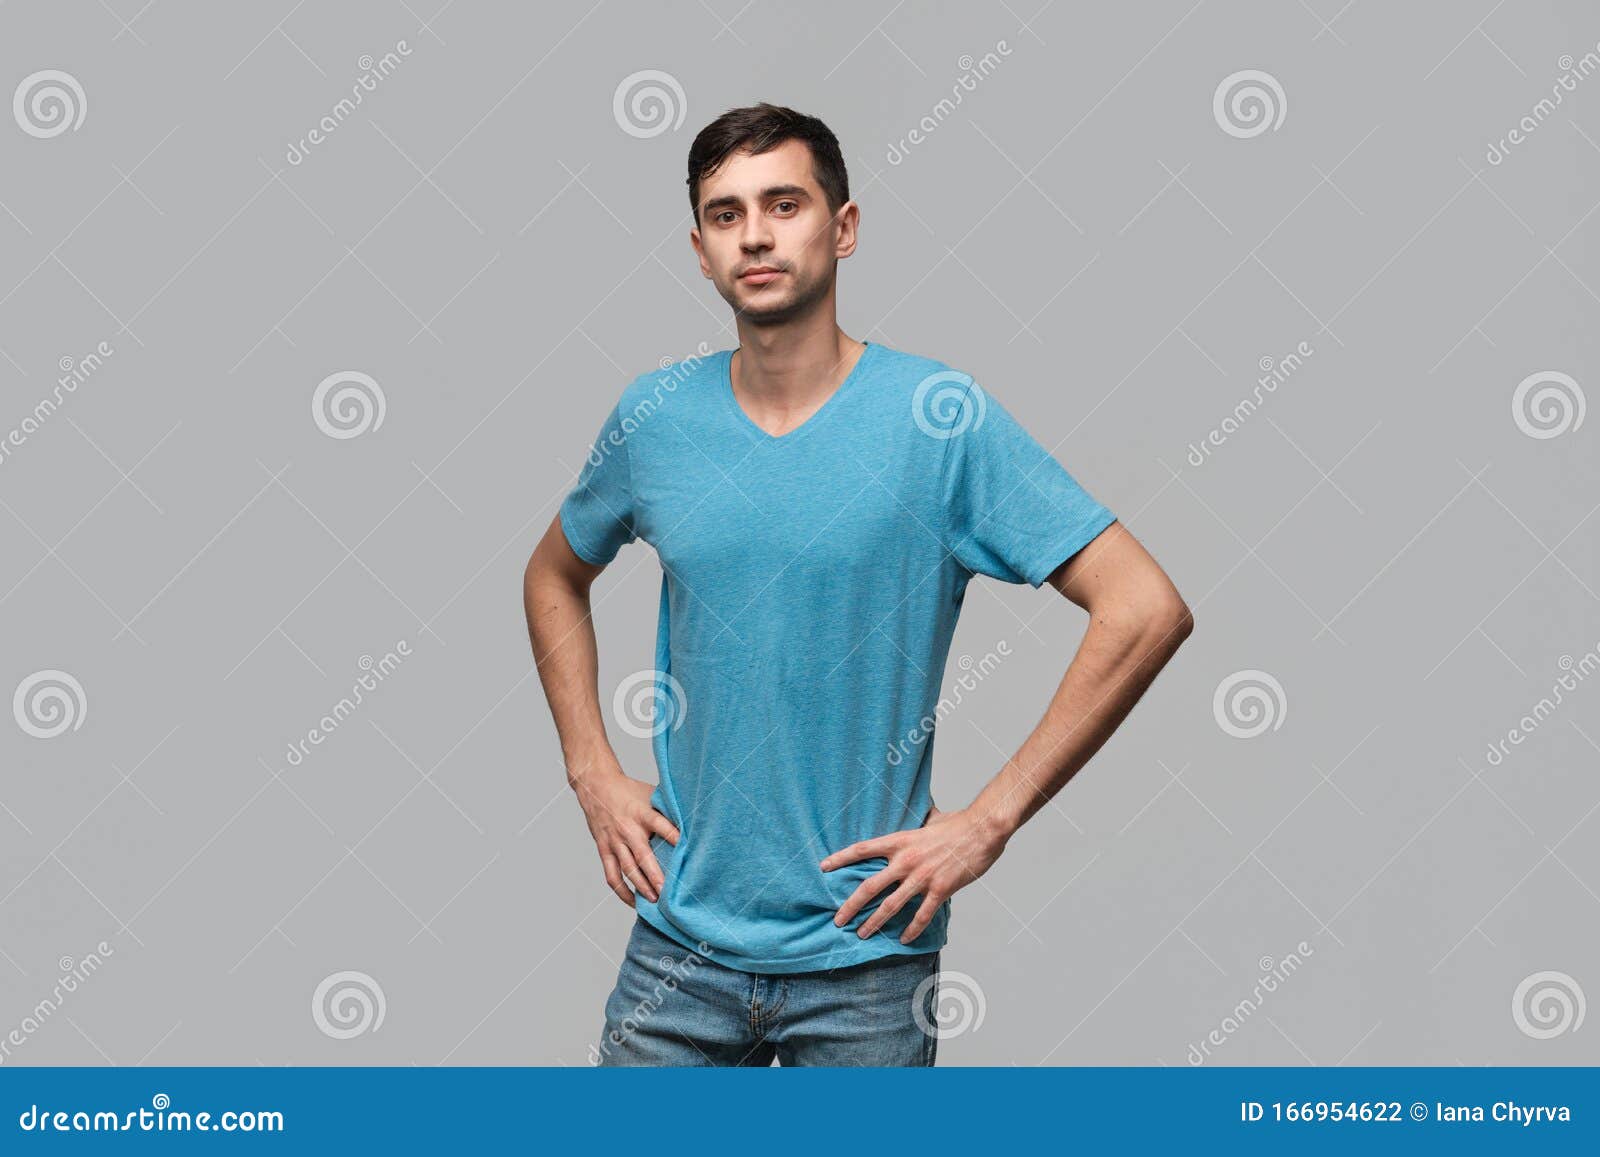 Confident Man in a Blue Tee Lookning at the Camera. Concept of Confidence Stock Photo - Image of